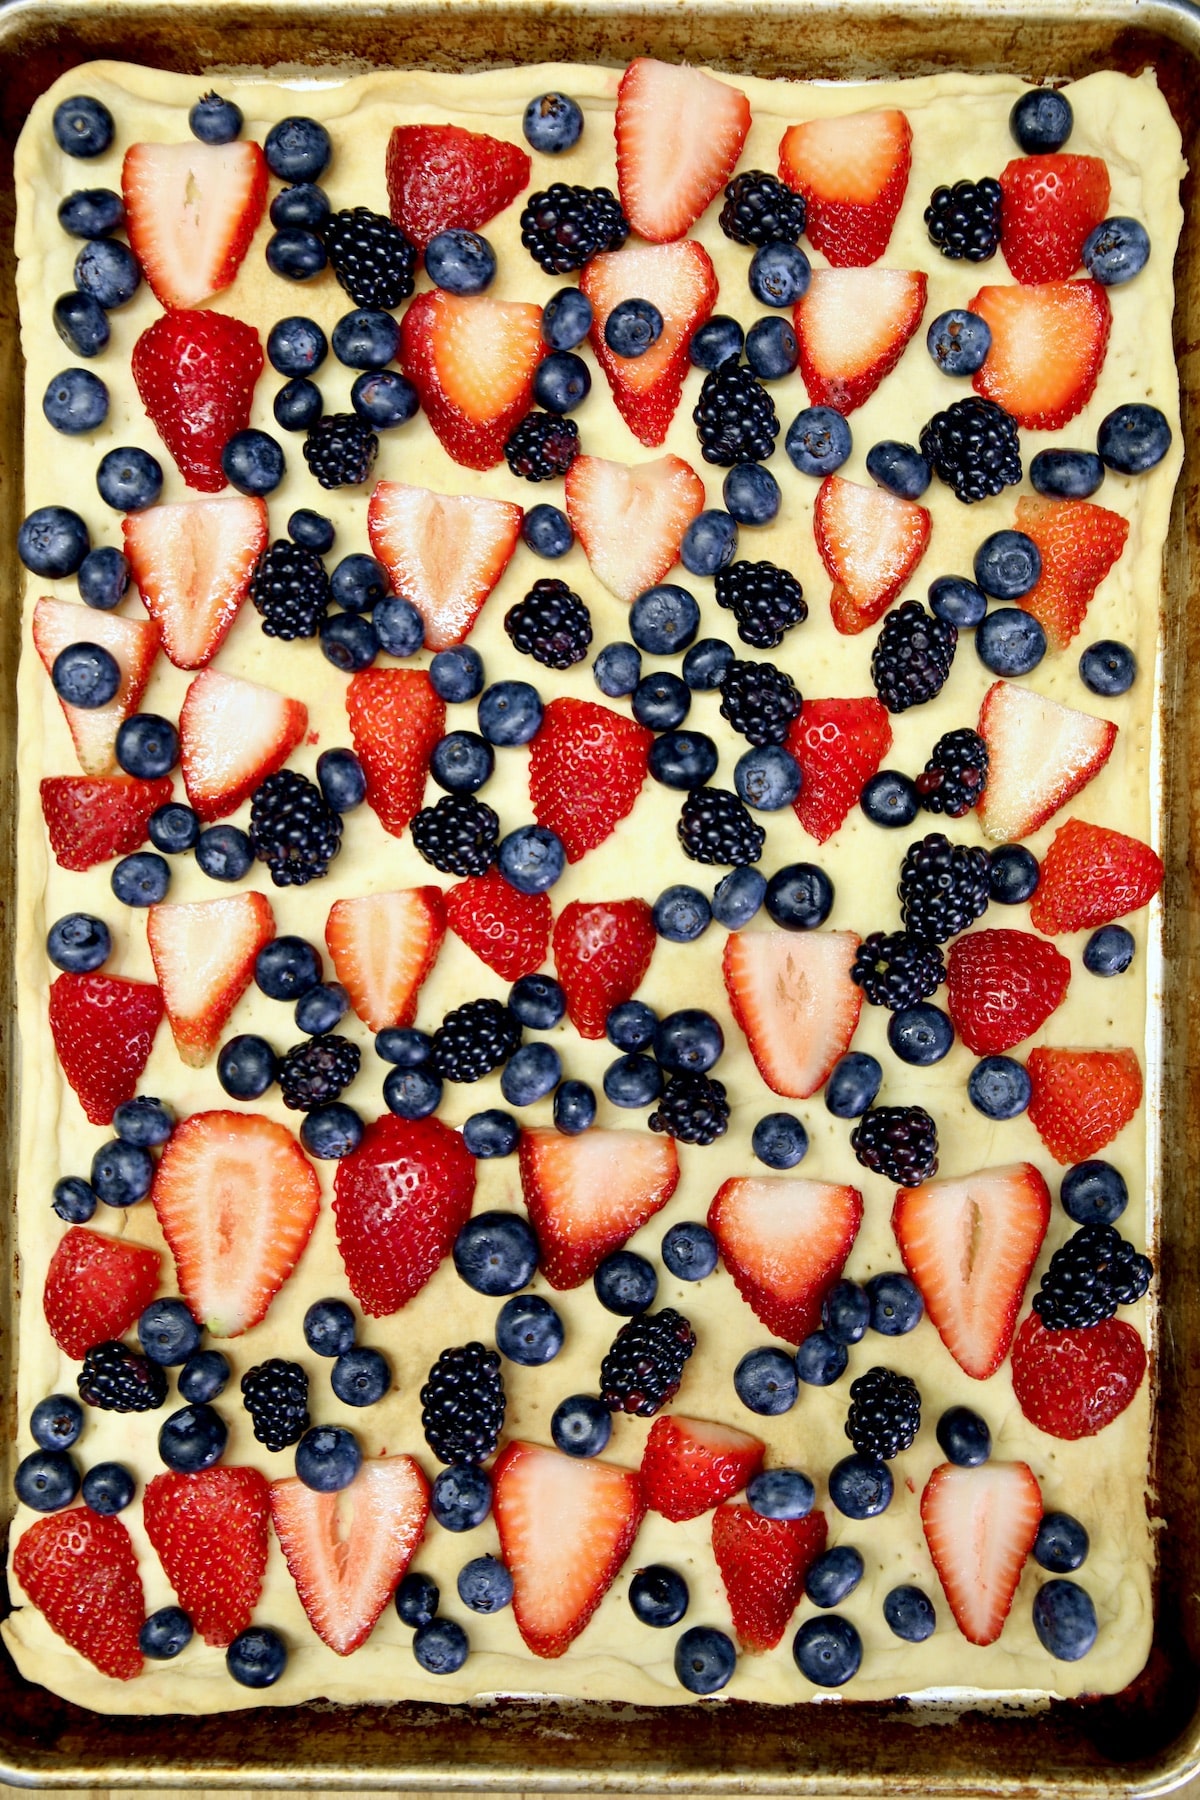 Mixed berries scattered over pie crust in a sheet pan.